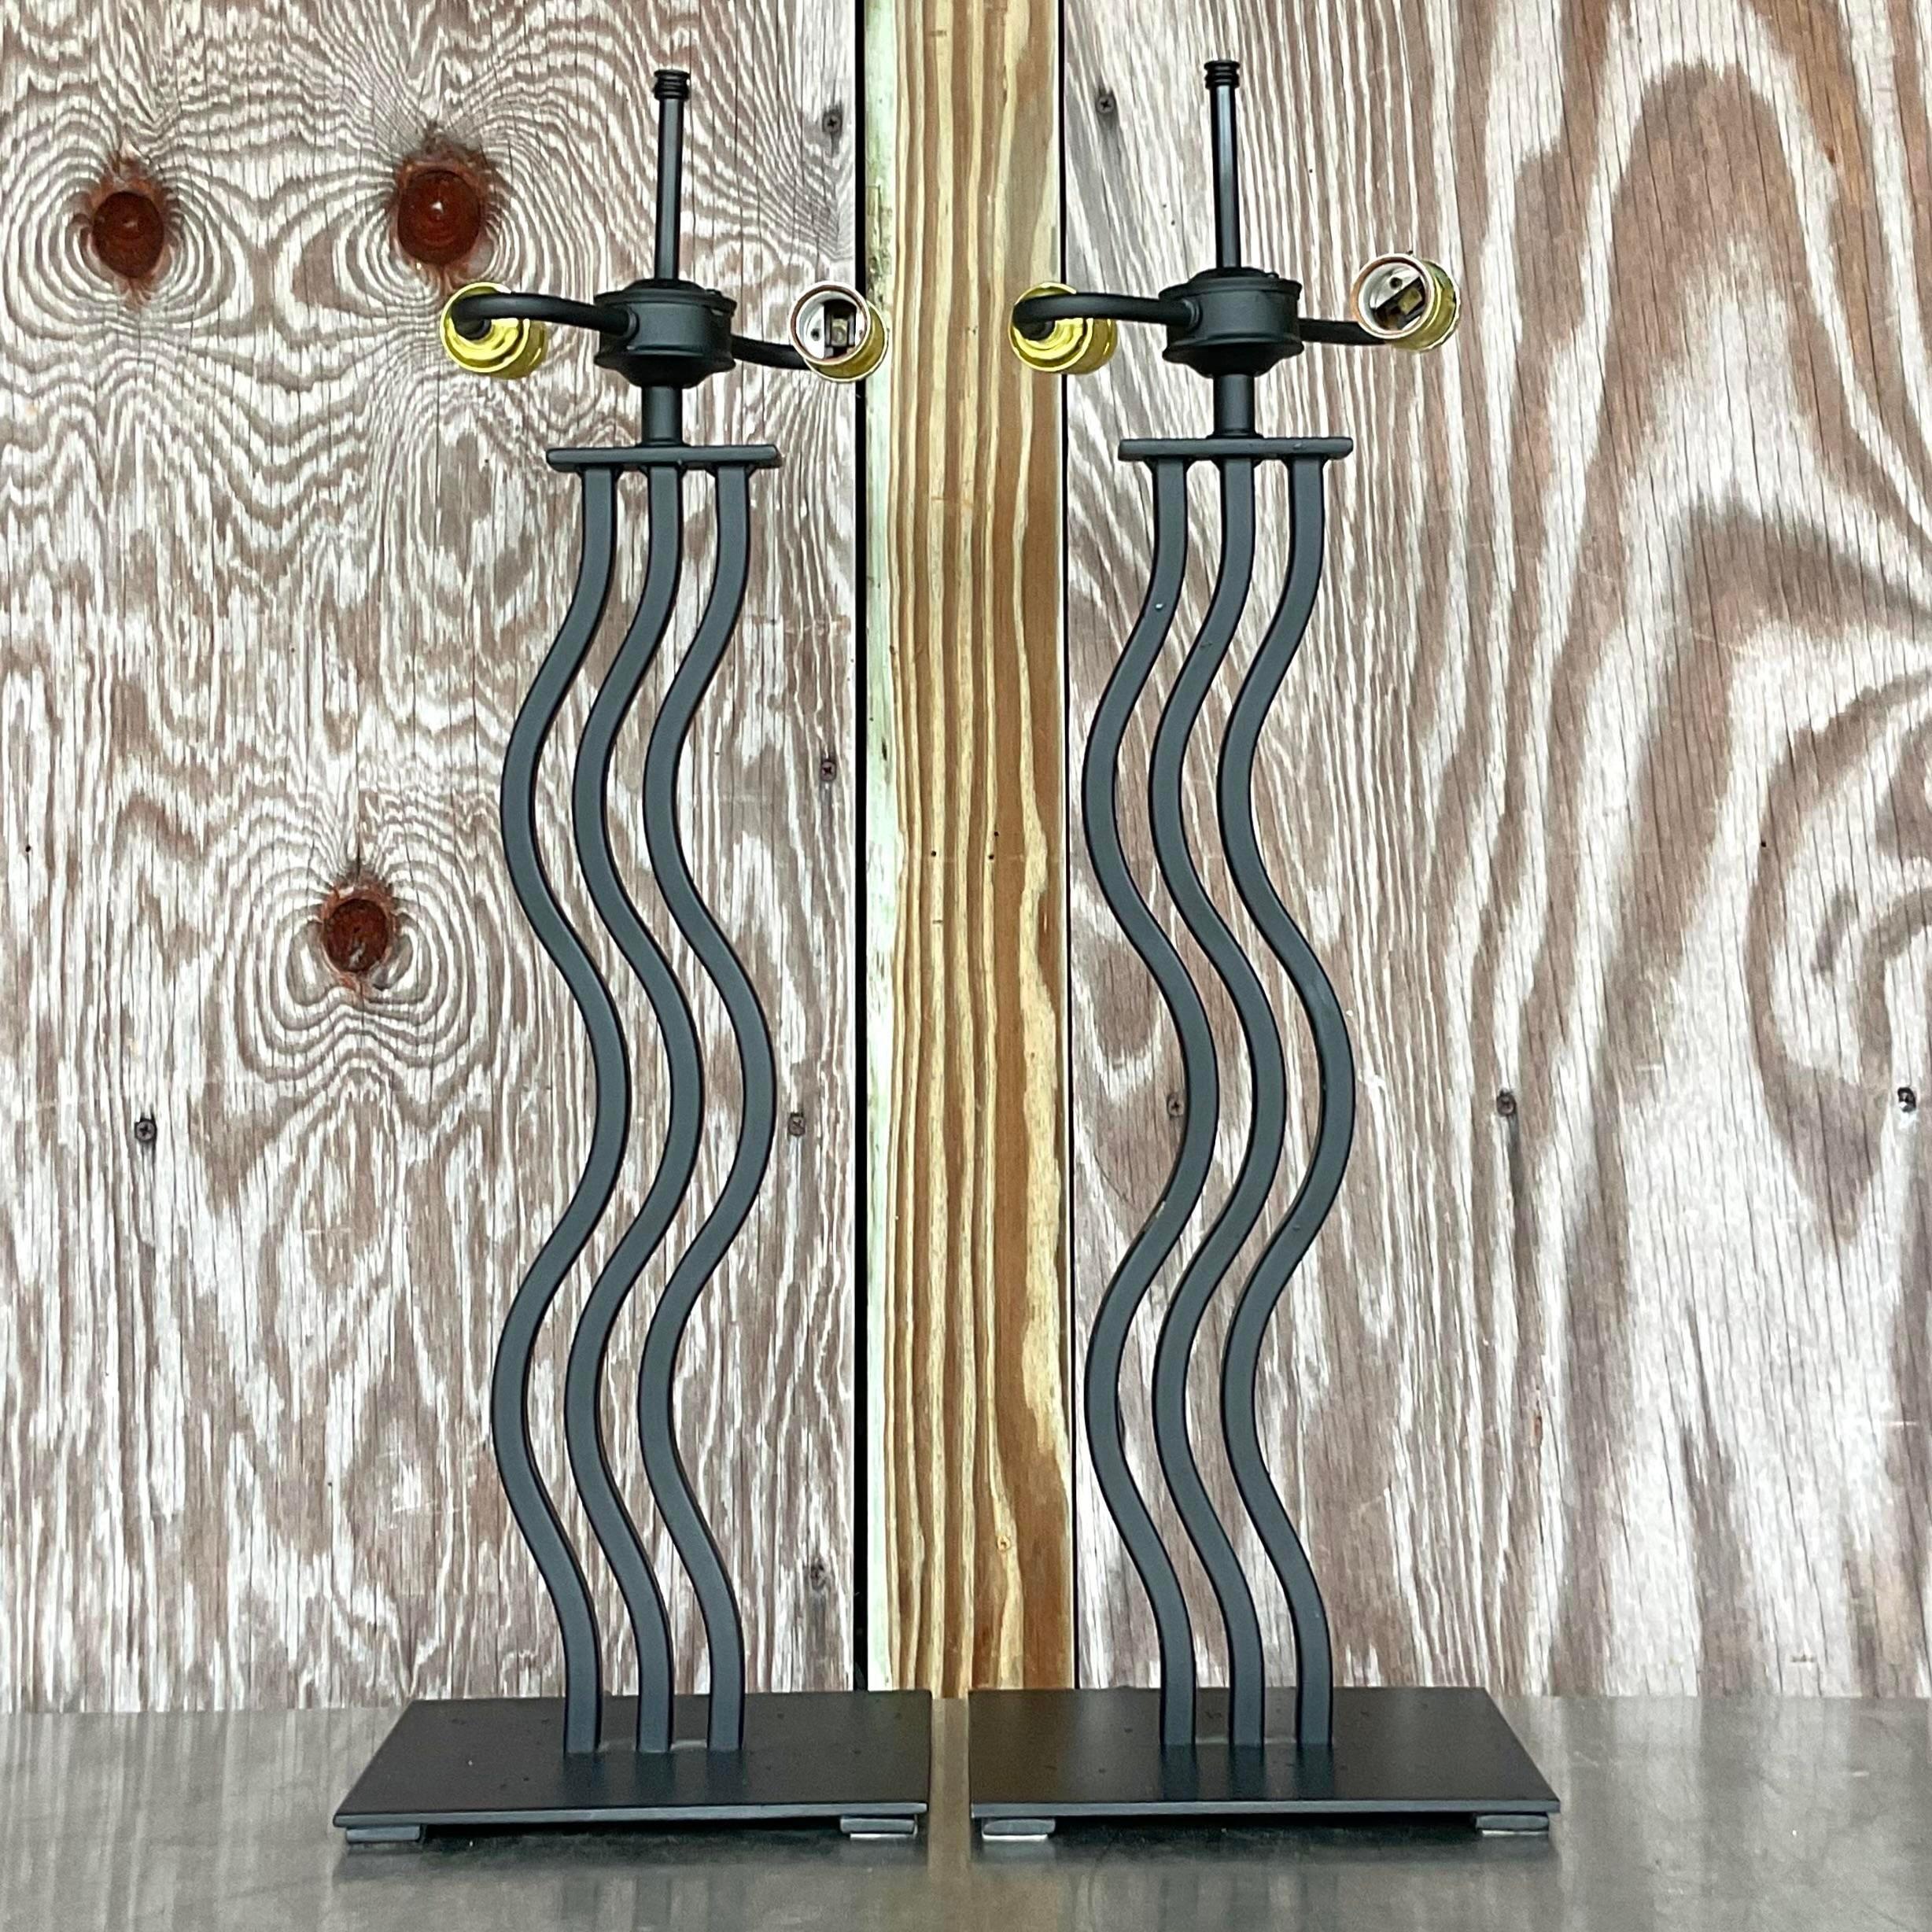 A fantastic pair of vintage Postmodern table lamps. The coveted Memphis style wave in a black metal. Acquired from a Palm Beach estate.